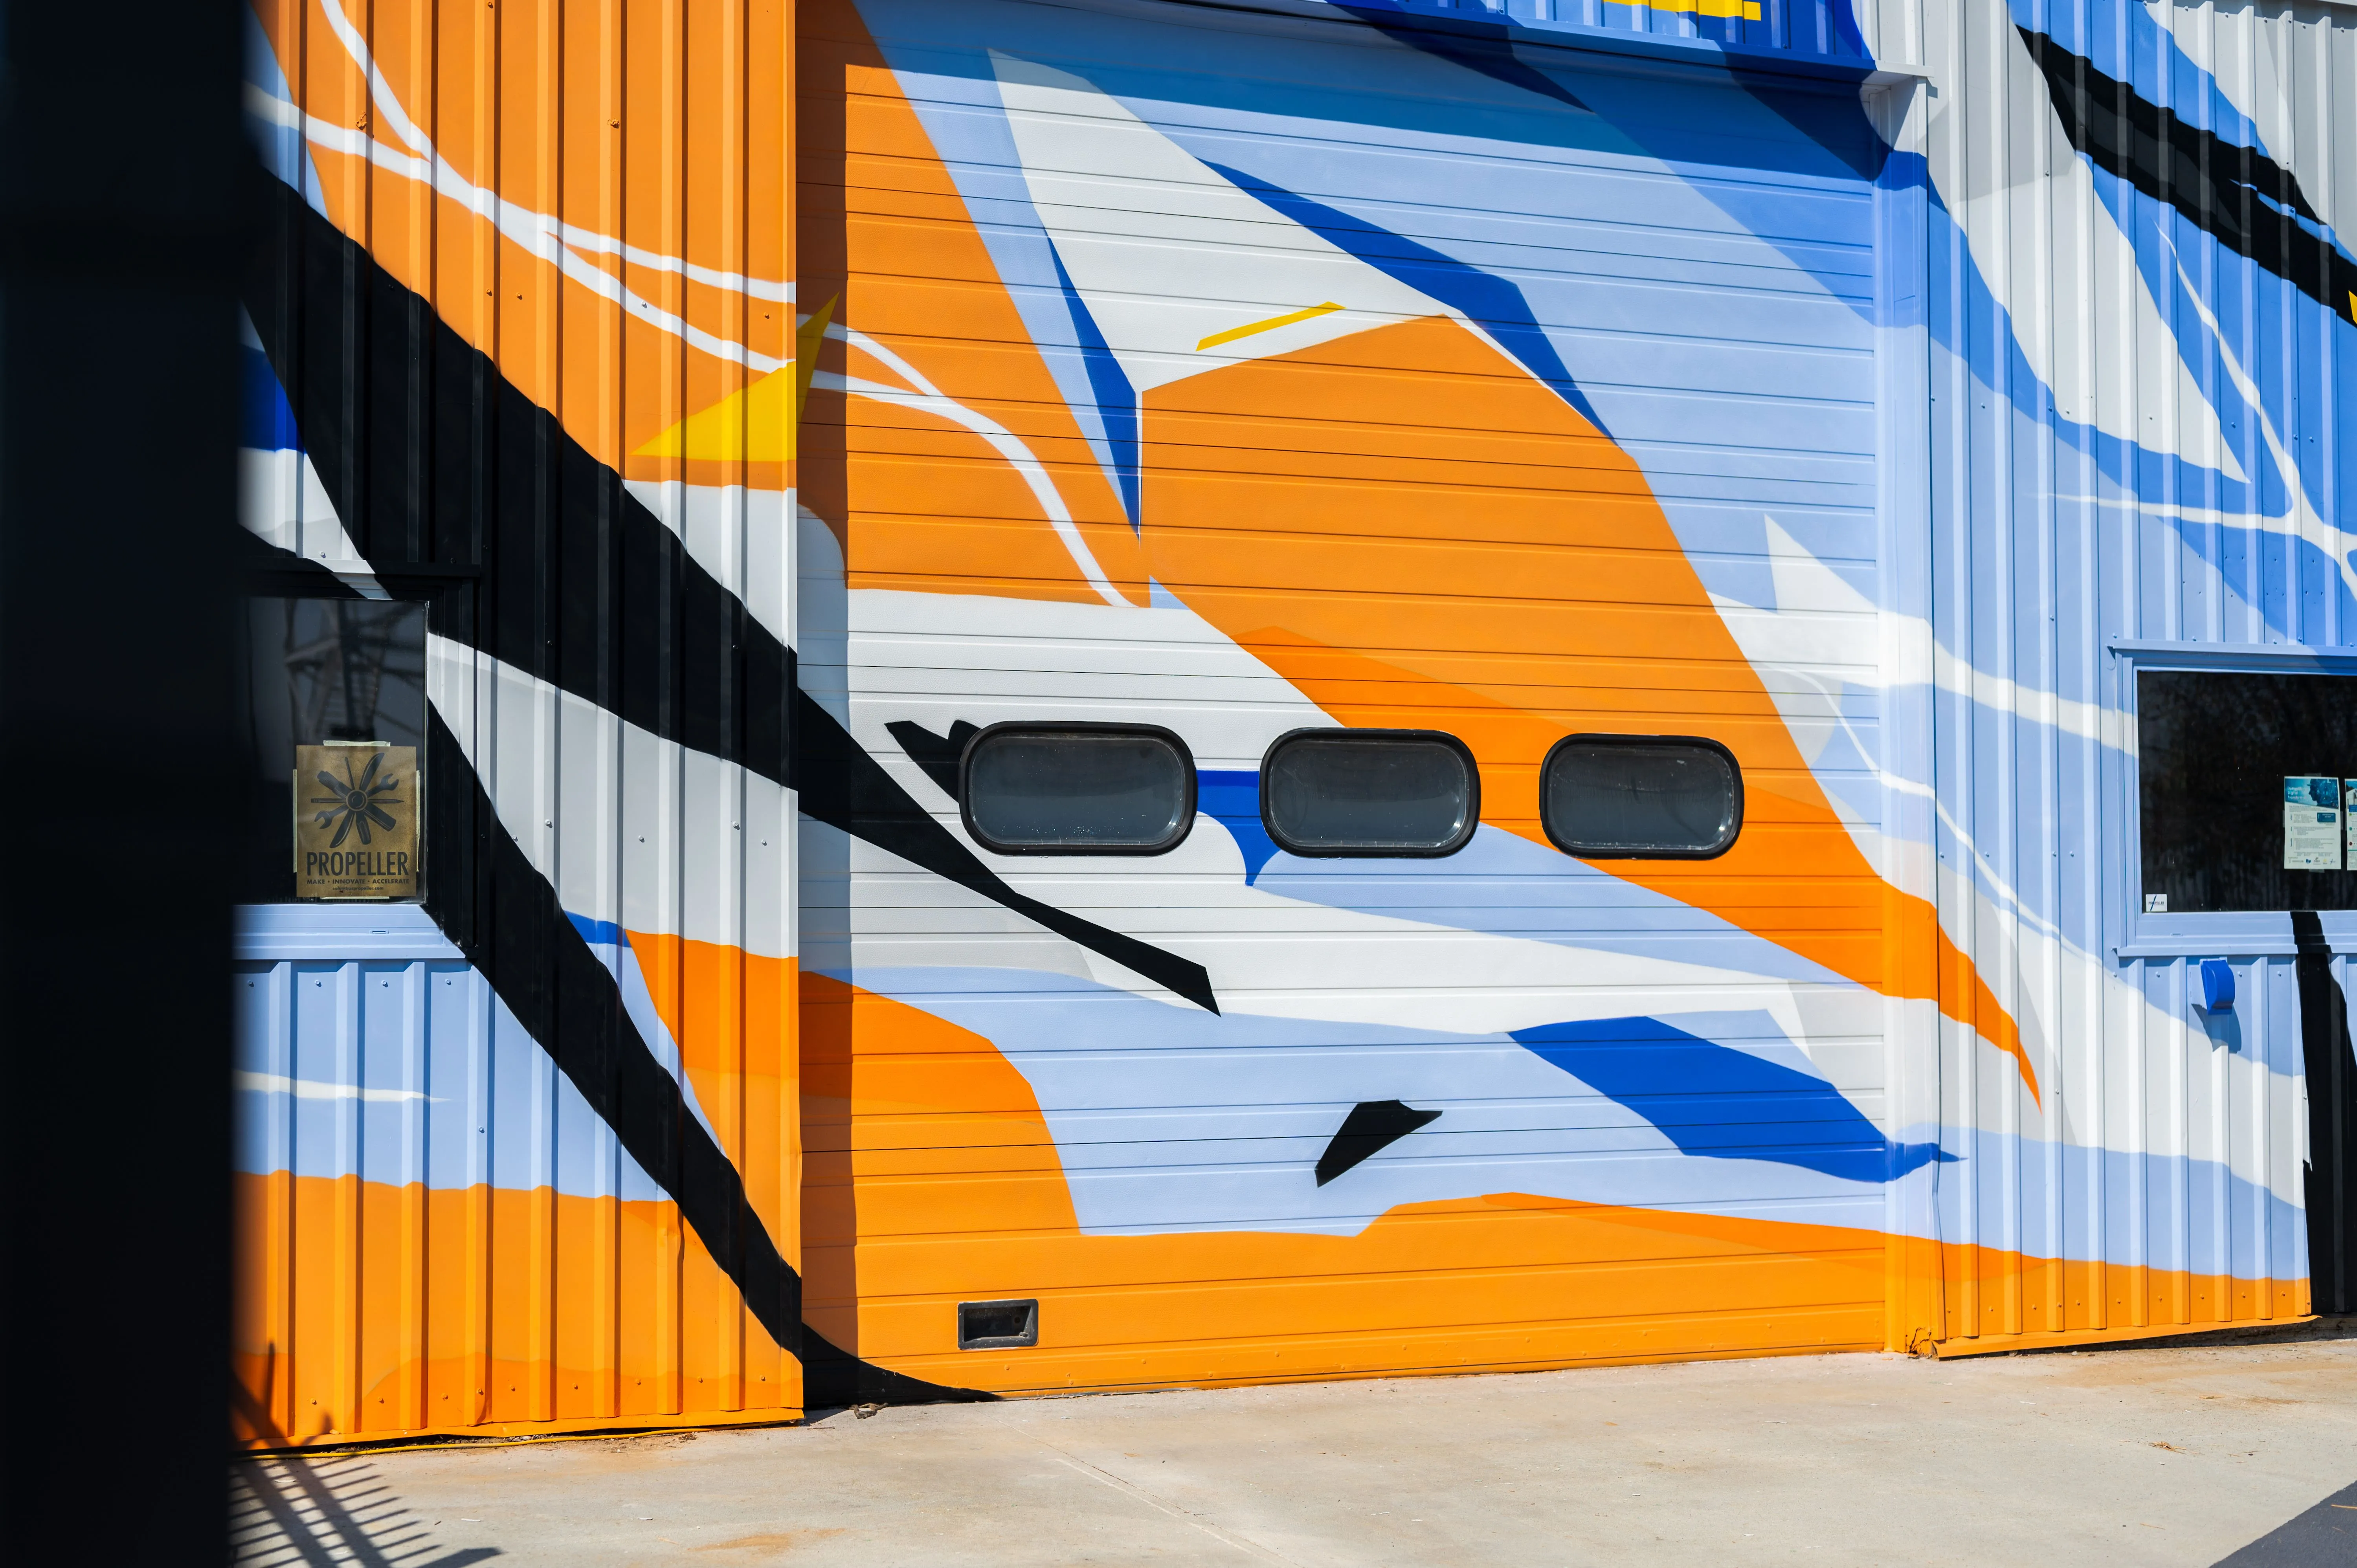 Abstract bird mural on a corrugated metal surface with shadow of stair railings.